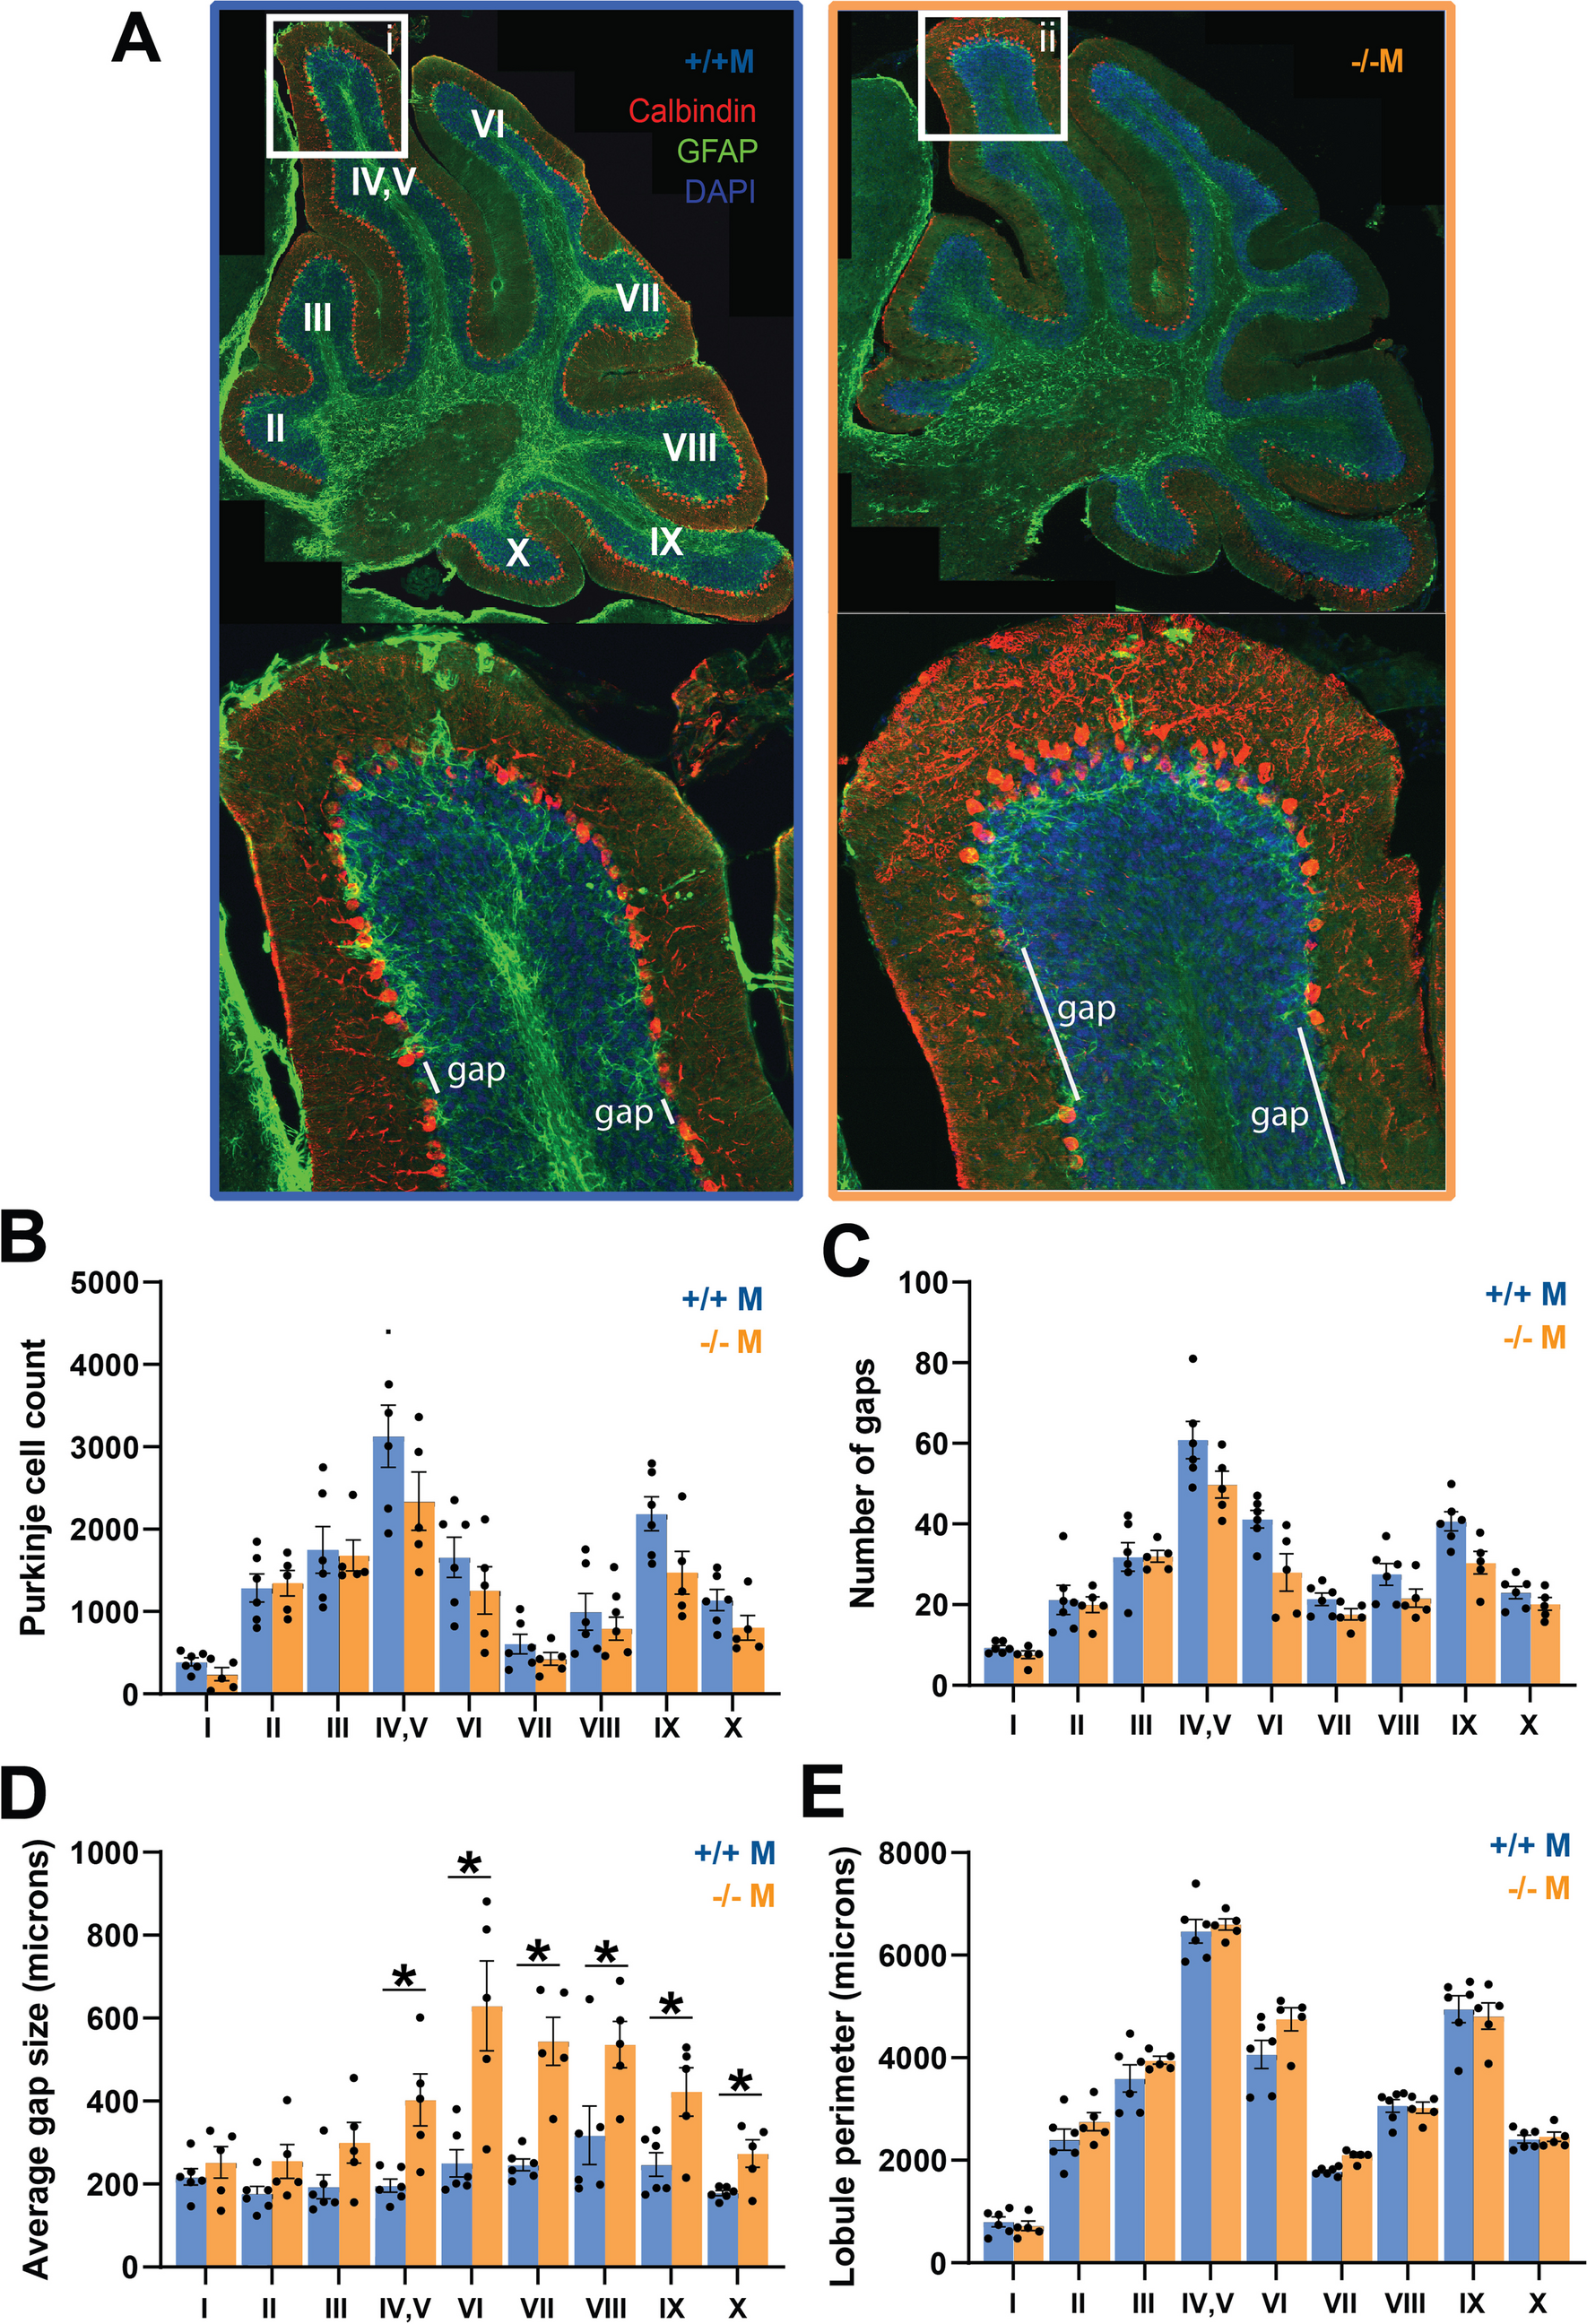 Knockdown of the Non-canonical Wnt Gene Prickle2 Leads to Cerebellar Purkinje Cell Abnormalities While Cerebellar-Mediated Behaviors Remain Intact